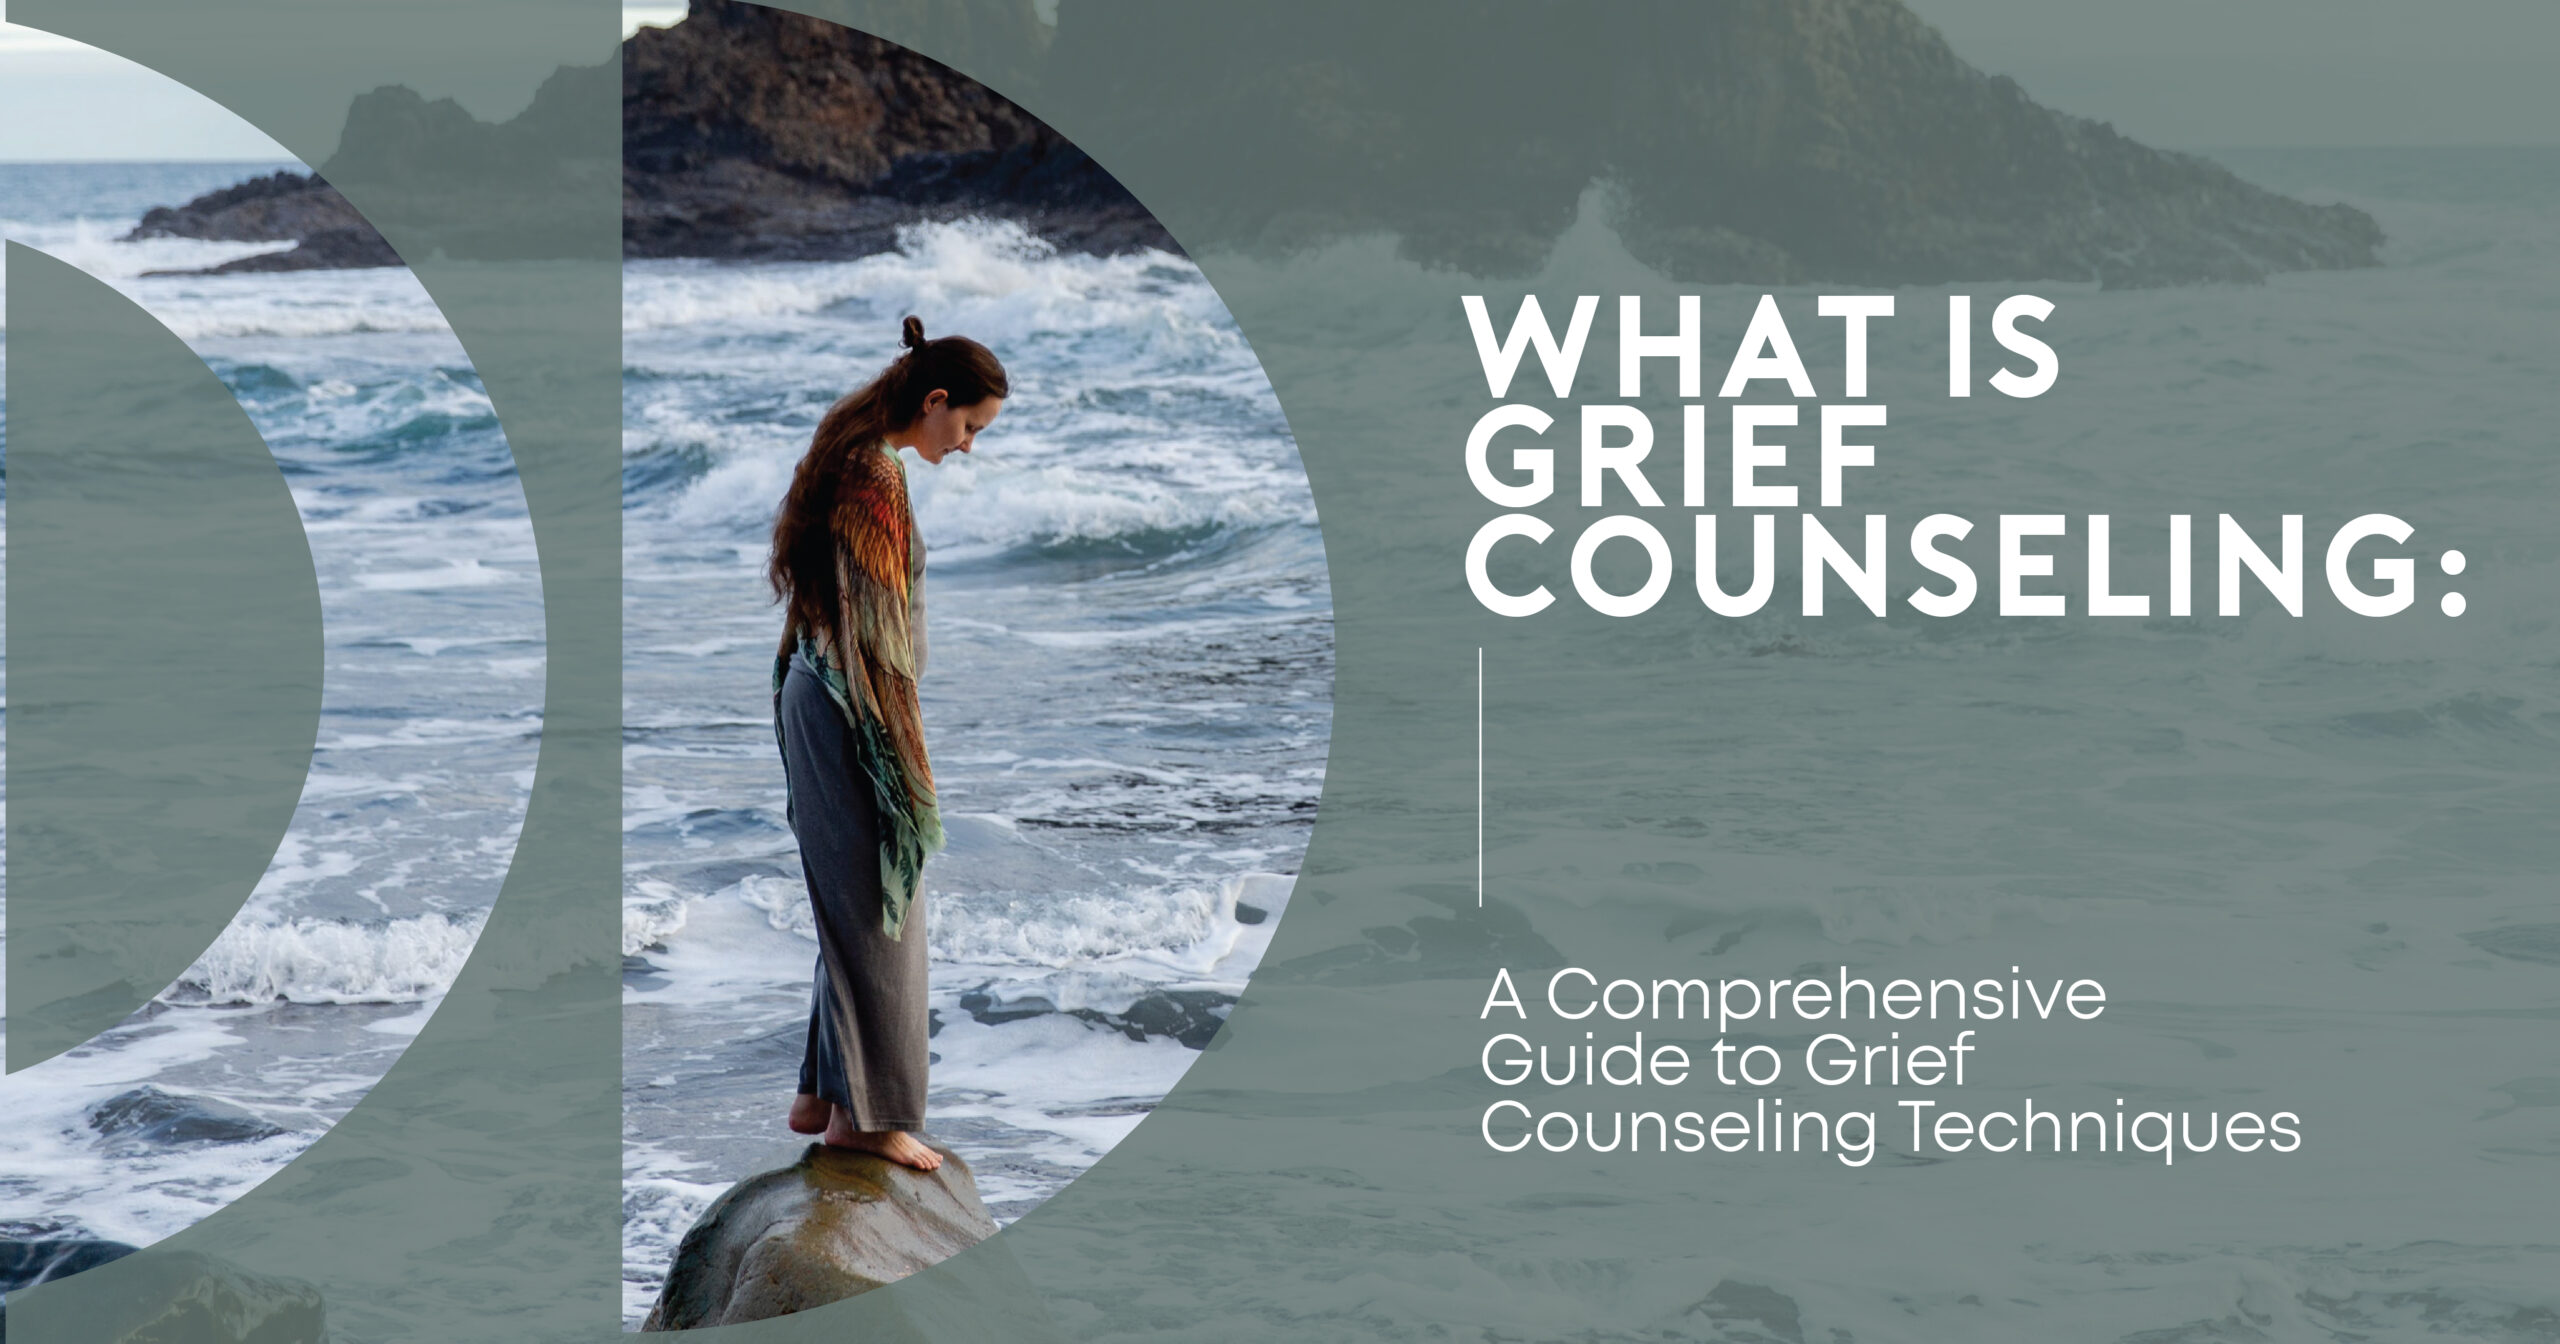 Grief Counseling Techniques